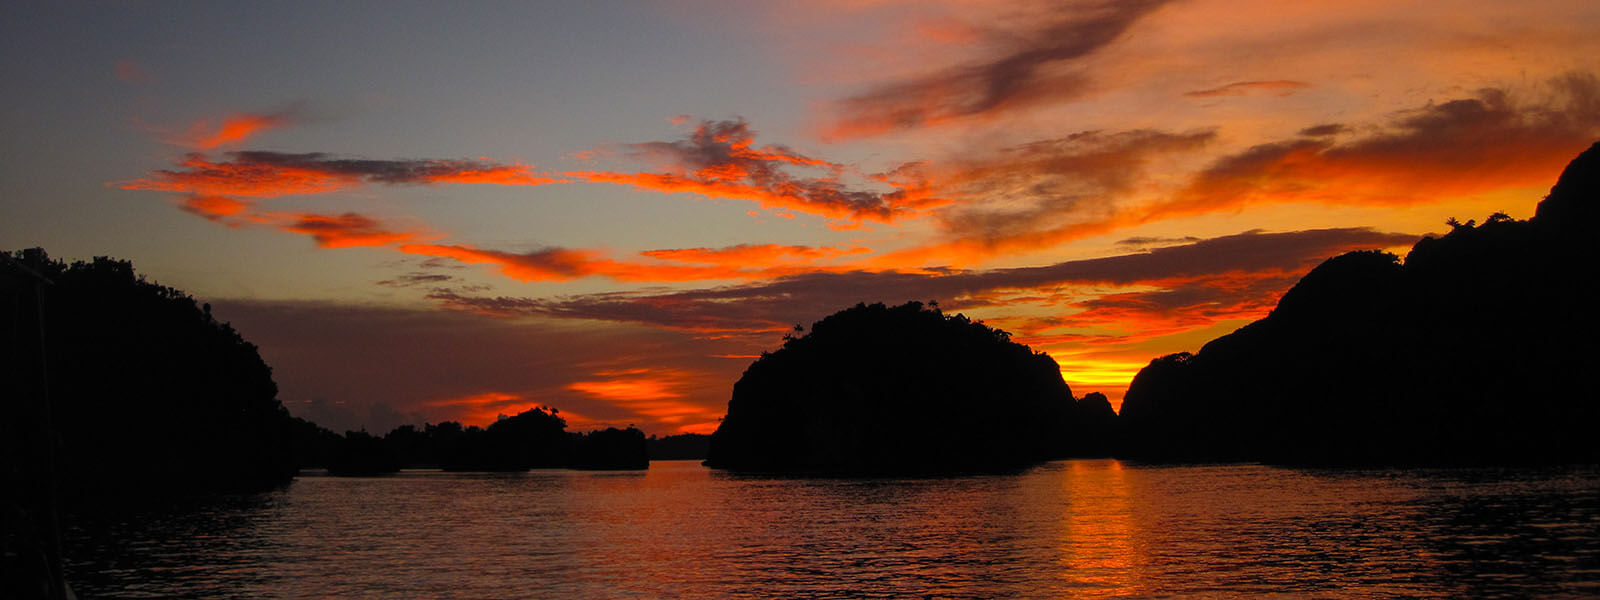 This is what a sunset in Misool, Raja Ampat looks like